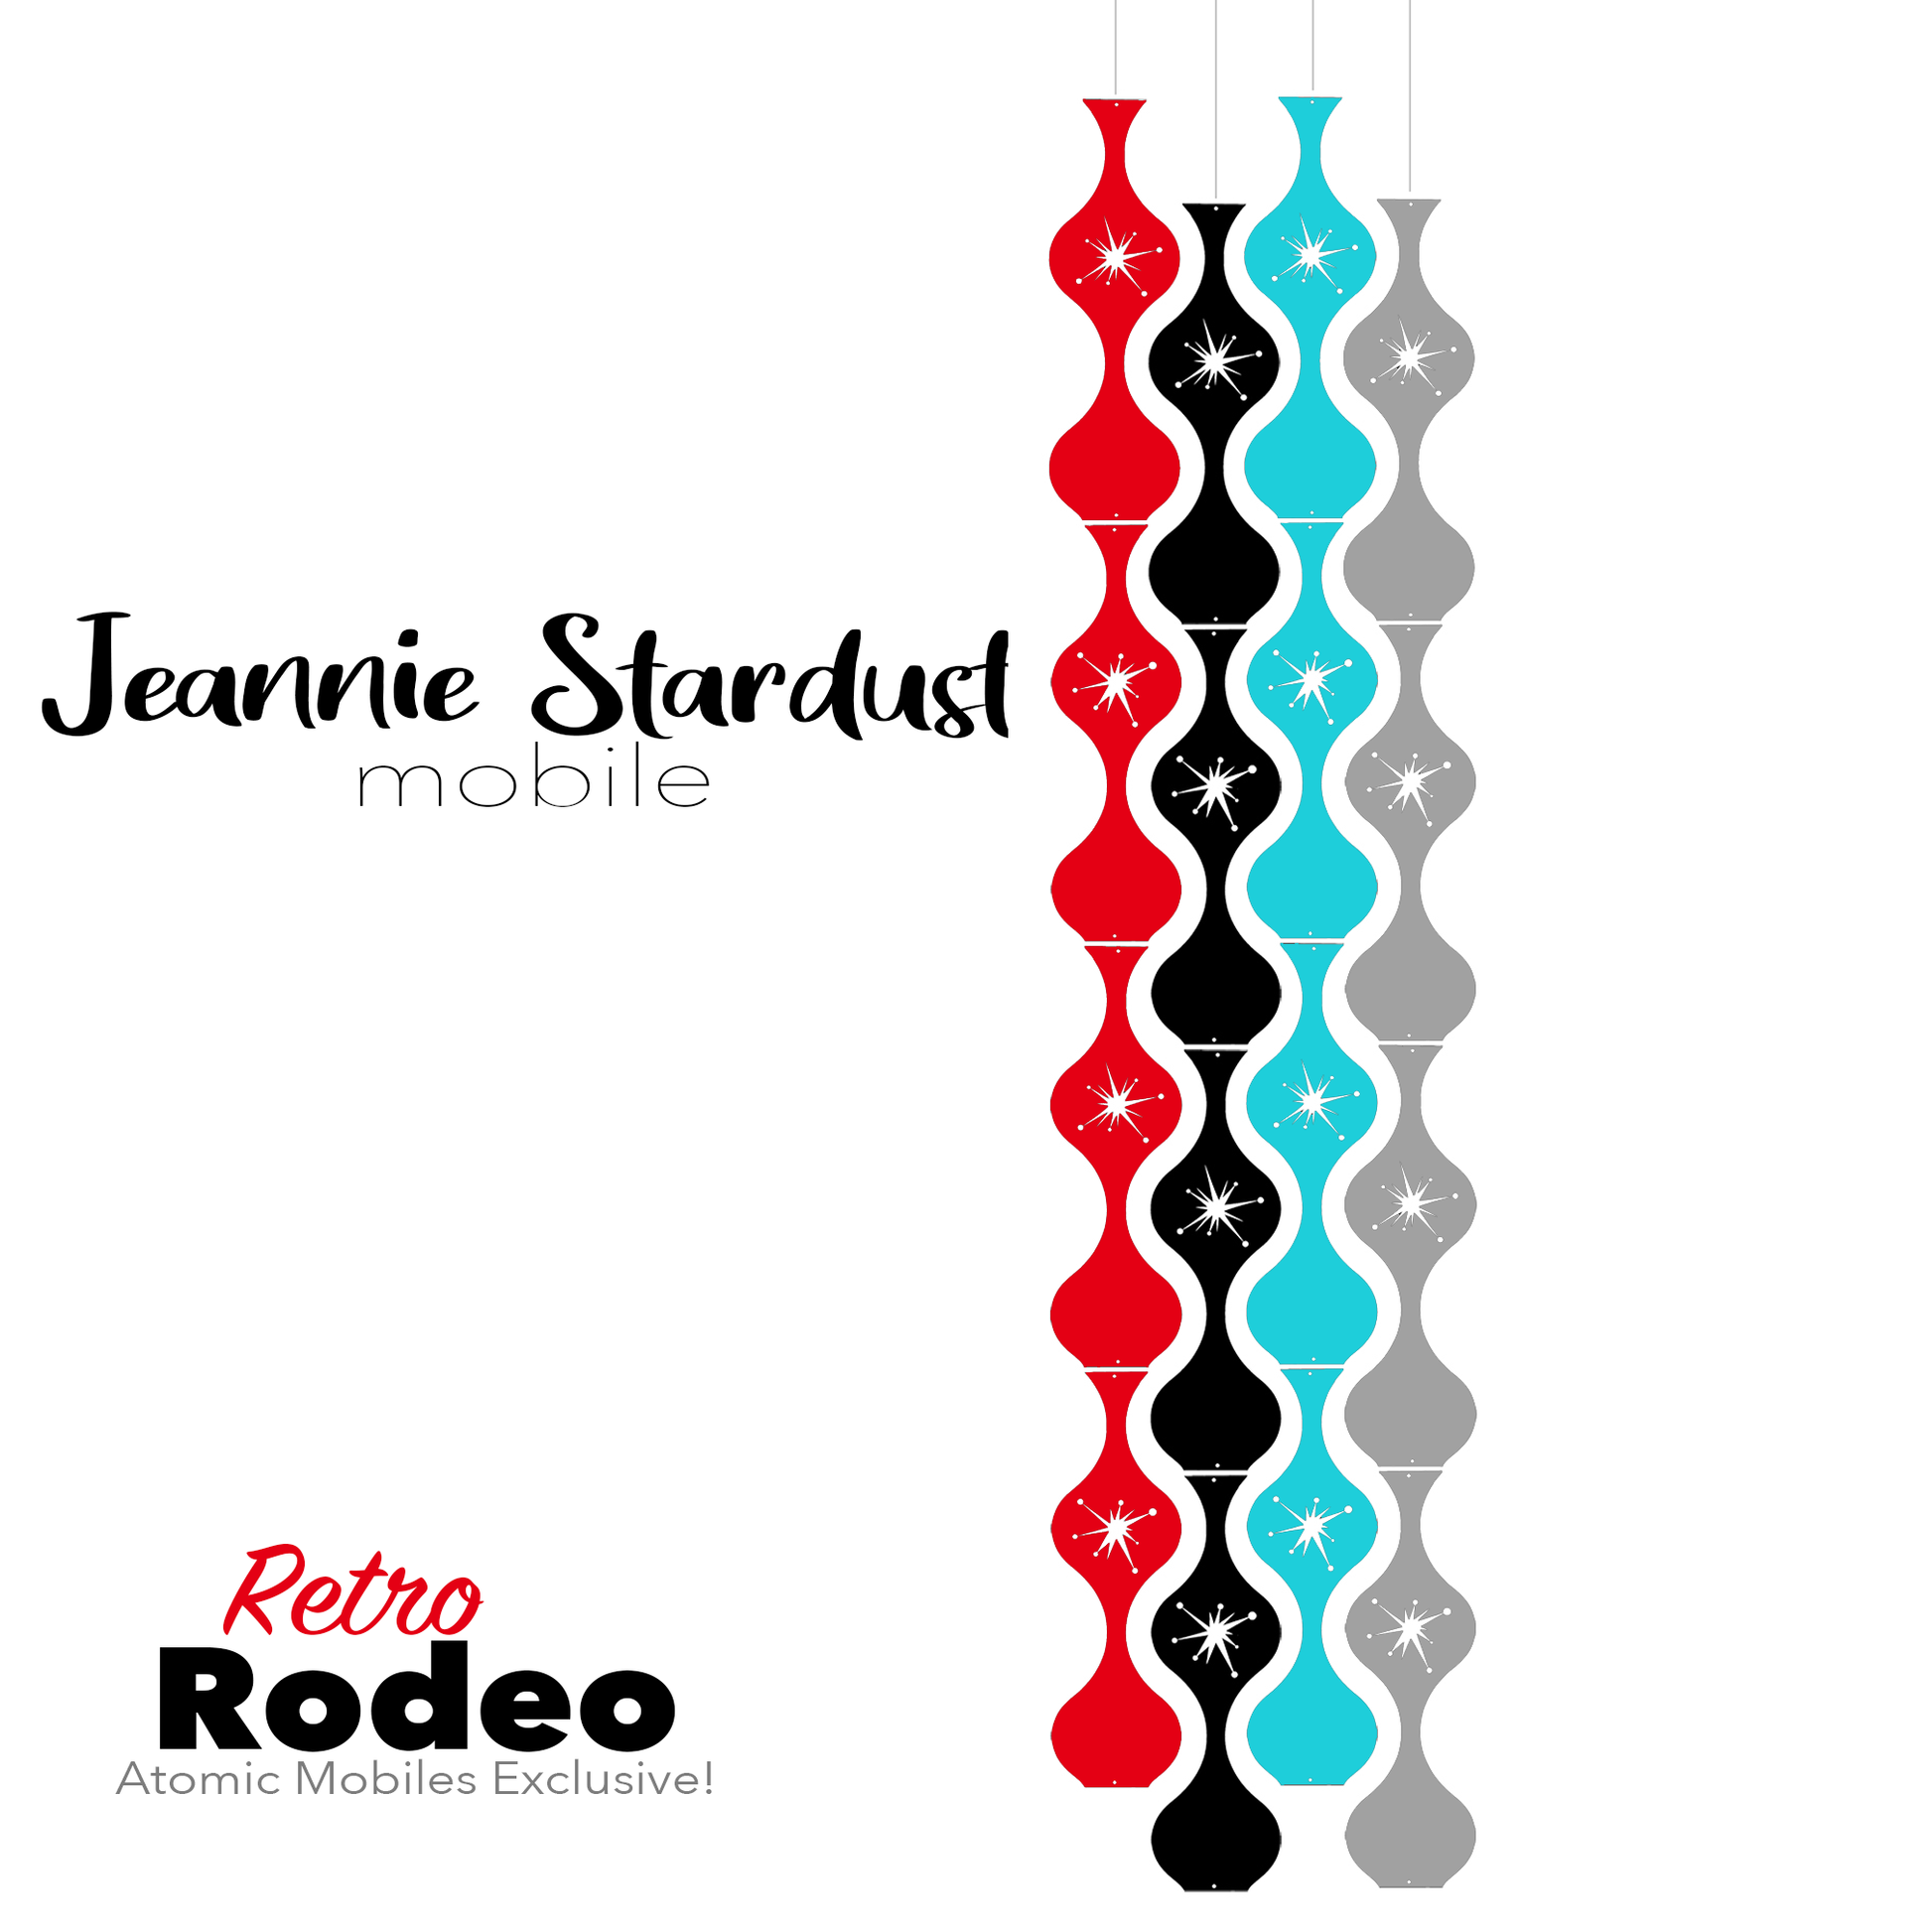 Retro Rodeo Jeannie Stardust Hanging Art Mobile - mid century modern home decor in Red, Aqua, Black, and Gray - by AtomicMobiles.com